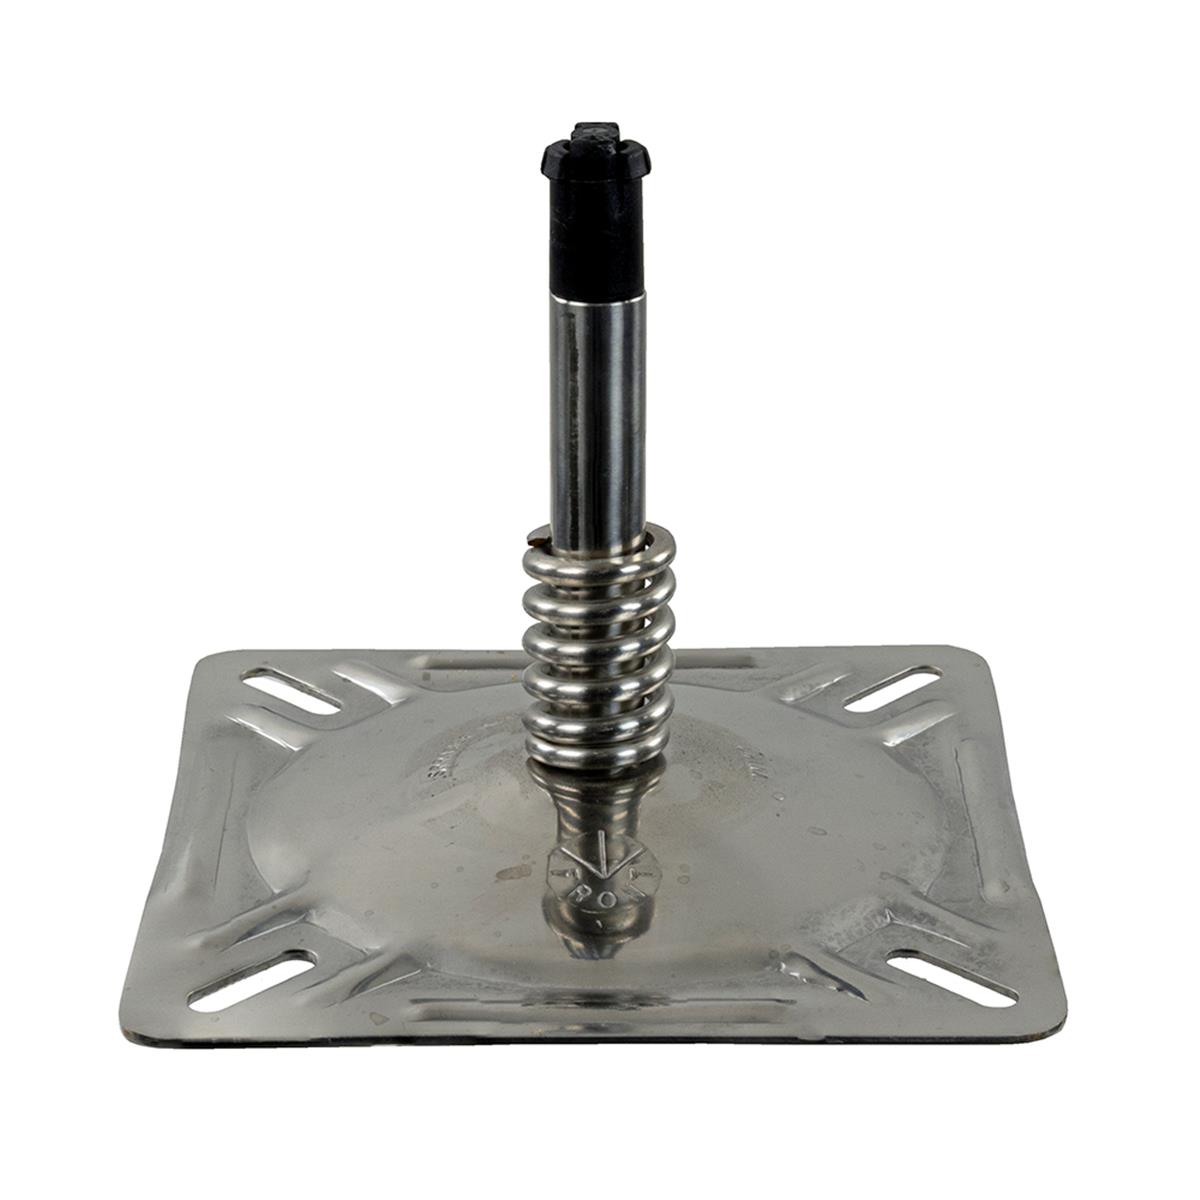 UPC 038132916180 product image for 1614201-PP 7 x 7 in. KingPin Swivel Seat Mount with Spring, Polished Finish | upcitemdb.com